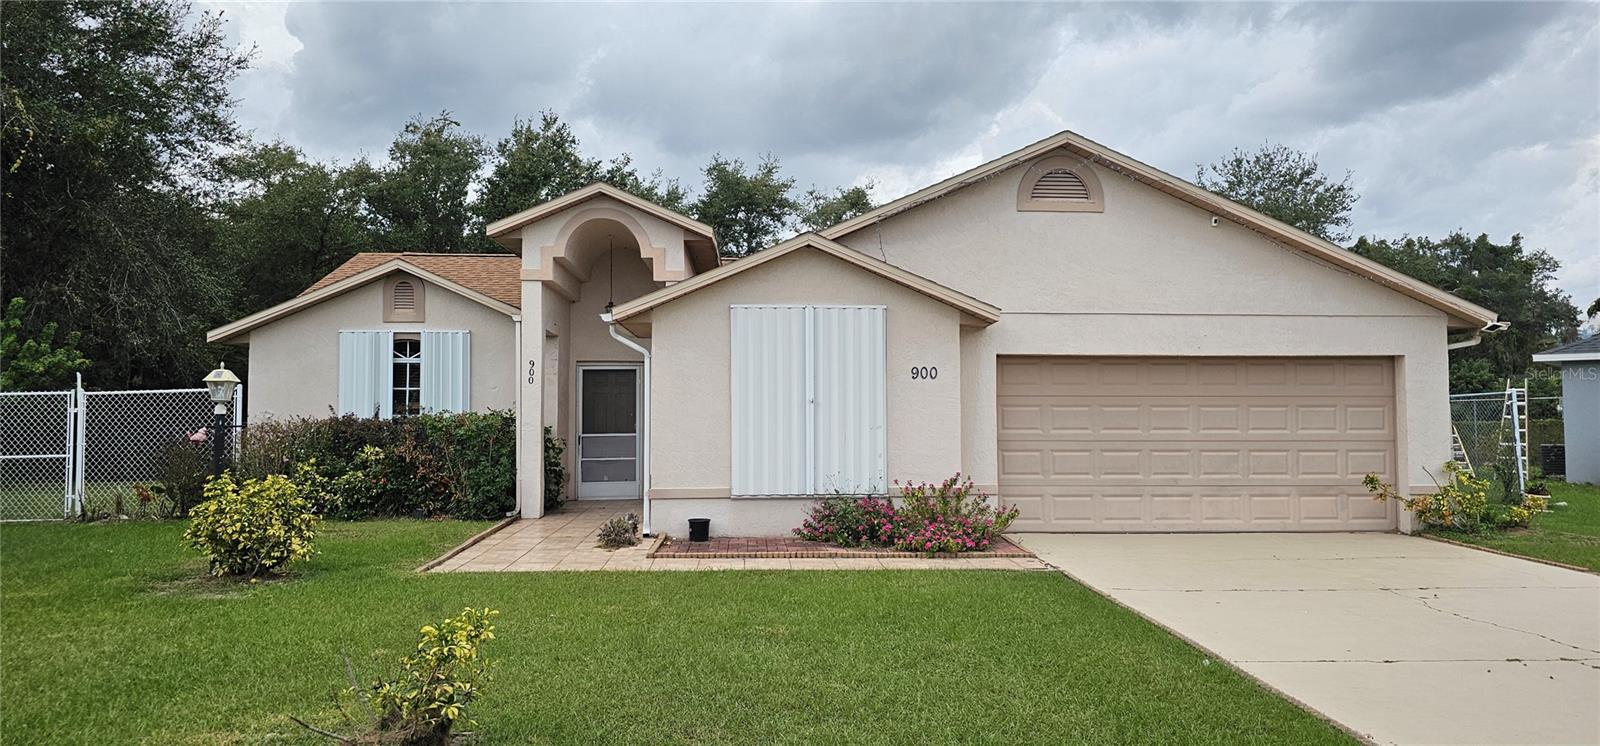 Photo one of 900 Woodcutter Ct Kissimmee FL 34744 | MLS S5095035